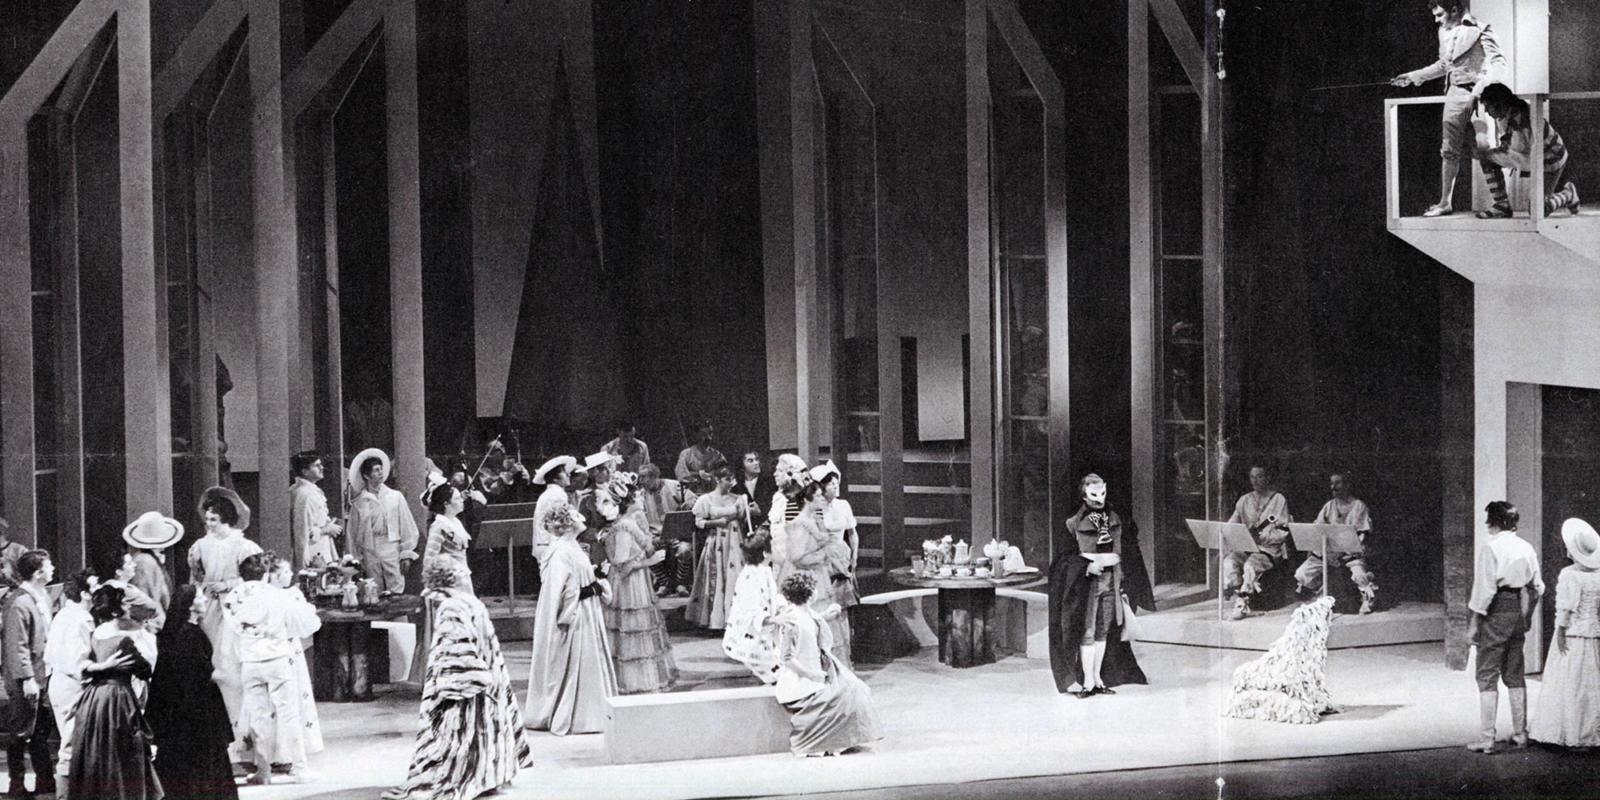 A black and white photograph of ensemble on the stage at the opening night of Don Giovanni in 1968